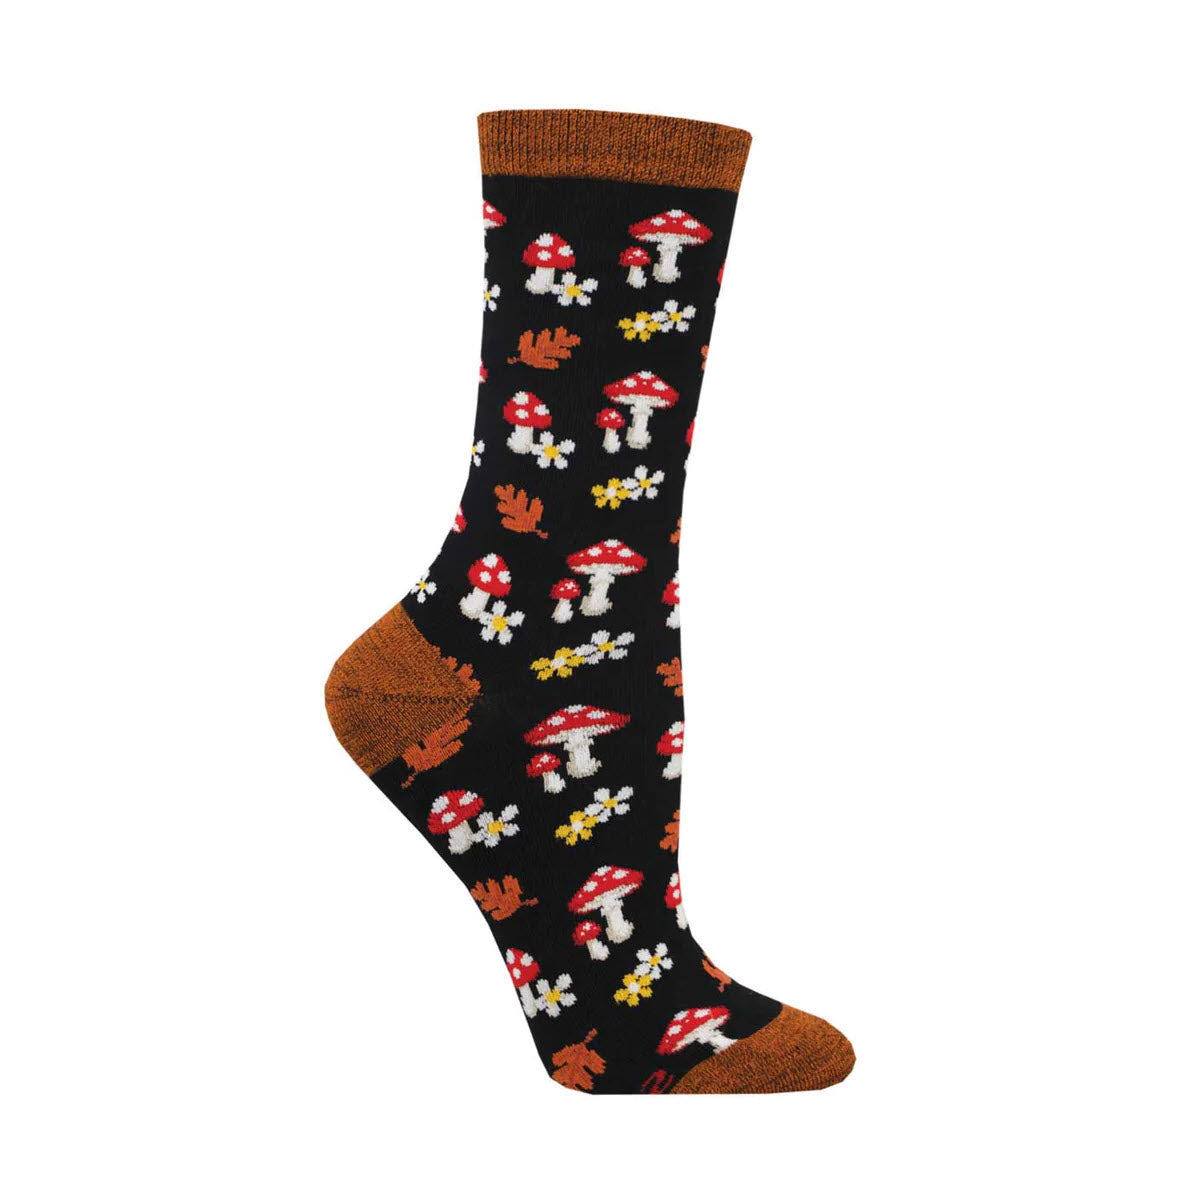 A single black Socksmith Bamboo Crew Socks Gems of the Forest Black - Womens with a colorful pattern of mushrooms and foliage on a white background, crafted from Bamboo fabric.